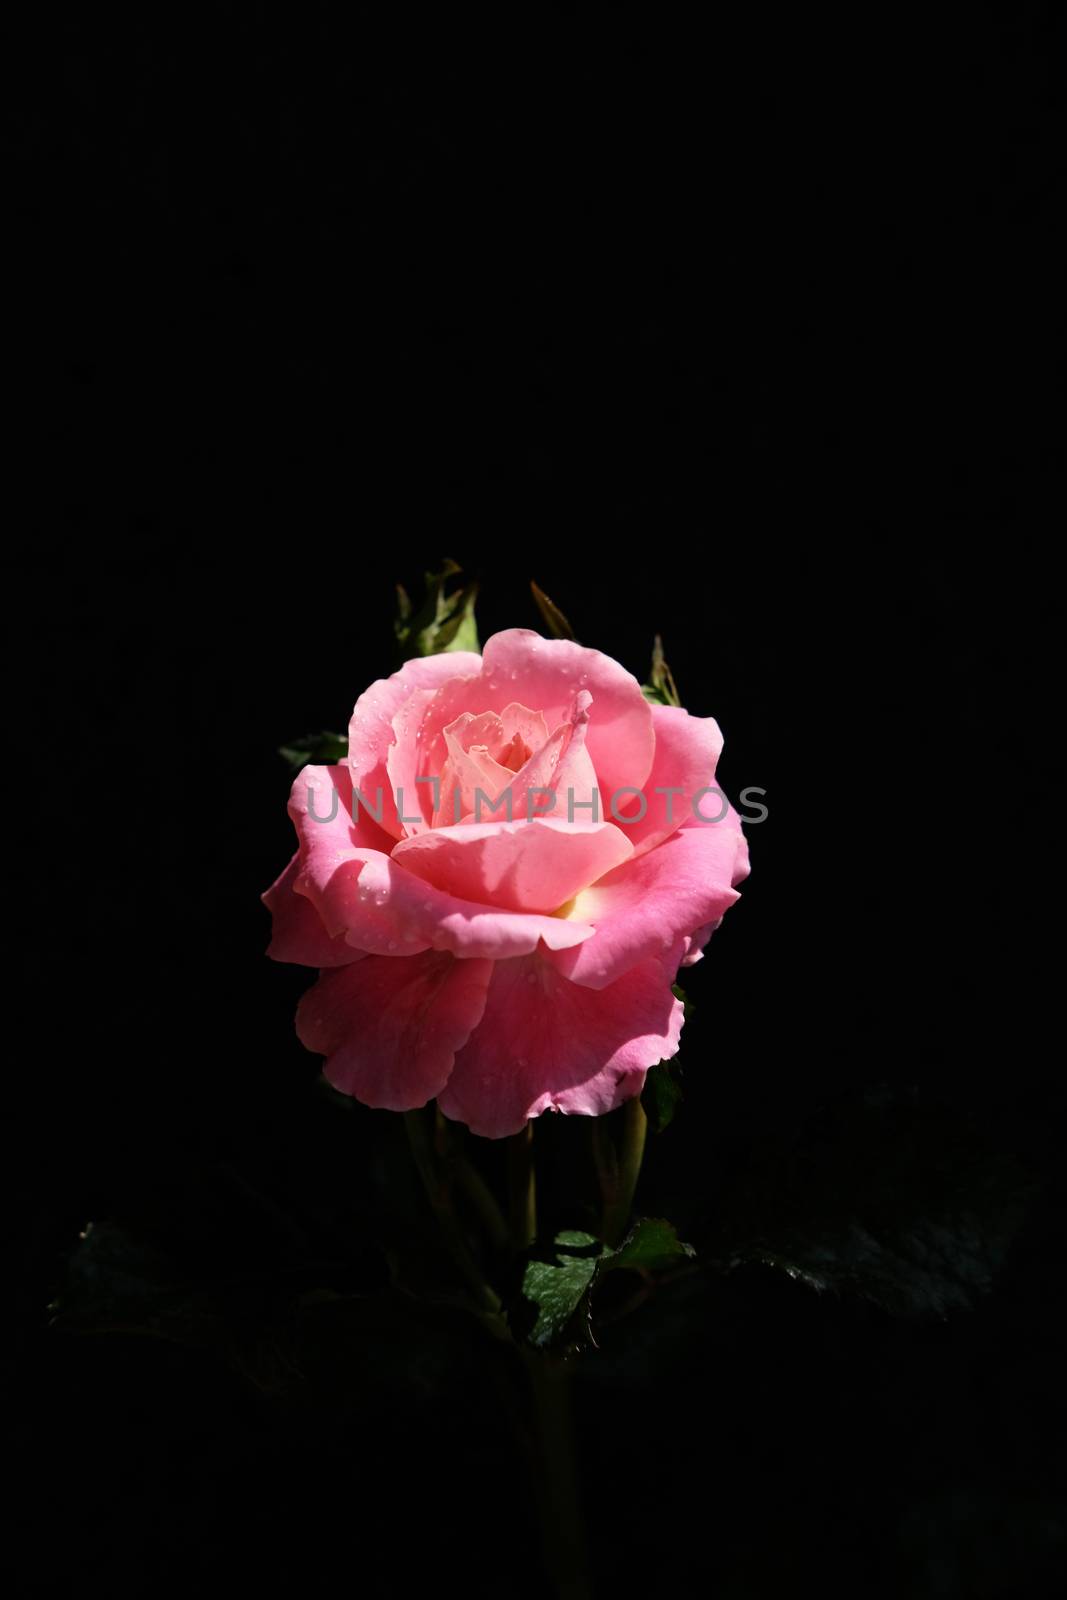 pink rose flower with stem and leaves isolated on black background by Macrostud